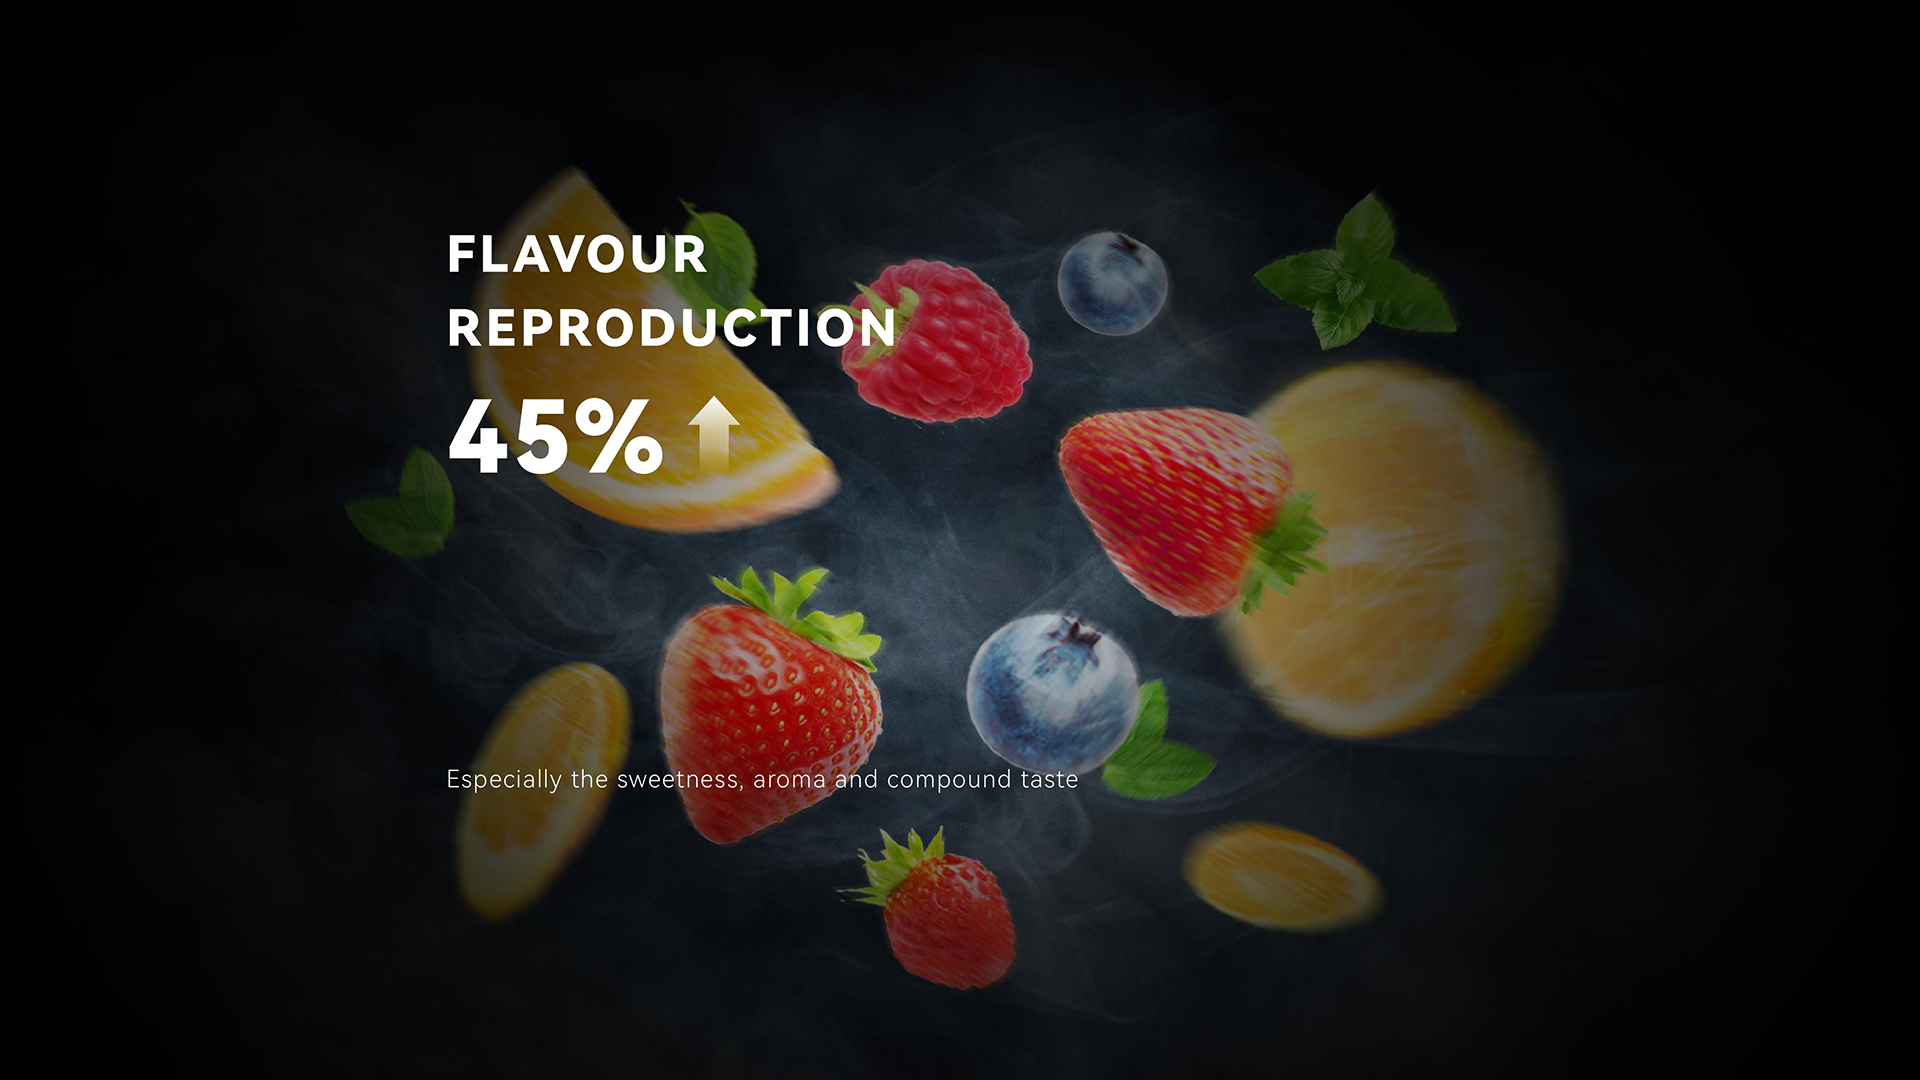 Sweetness and aroma of flavours improved 45% for better flavour production.